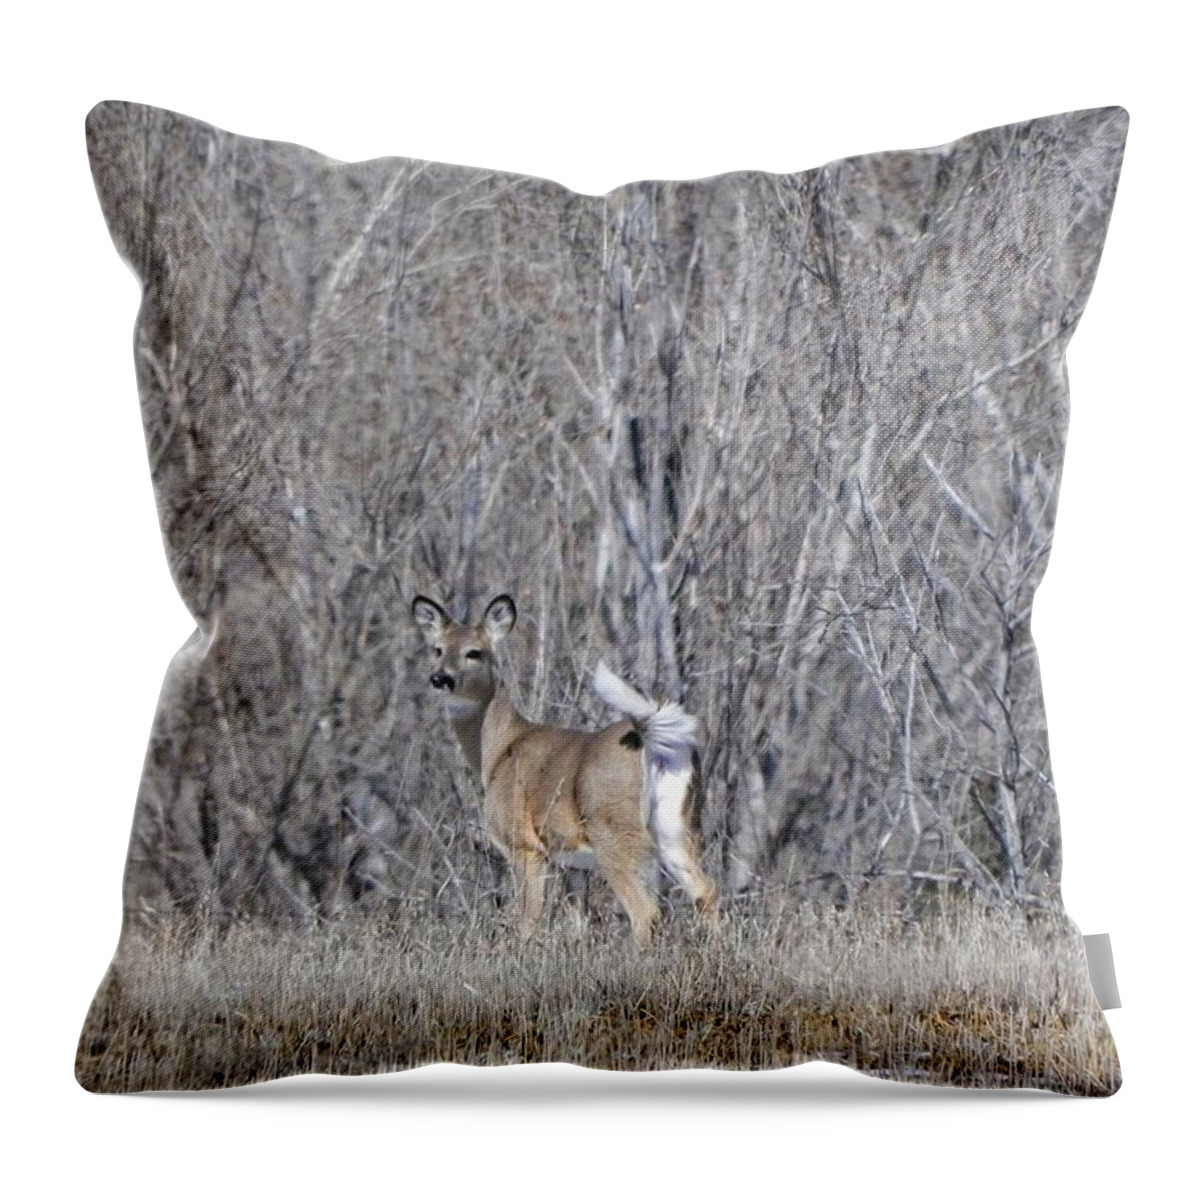 White Tail Deer Throw Pillow featuring the photograph Fluffy White Tail by Amanda R Wright